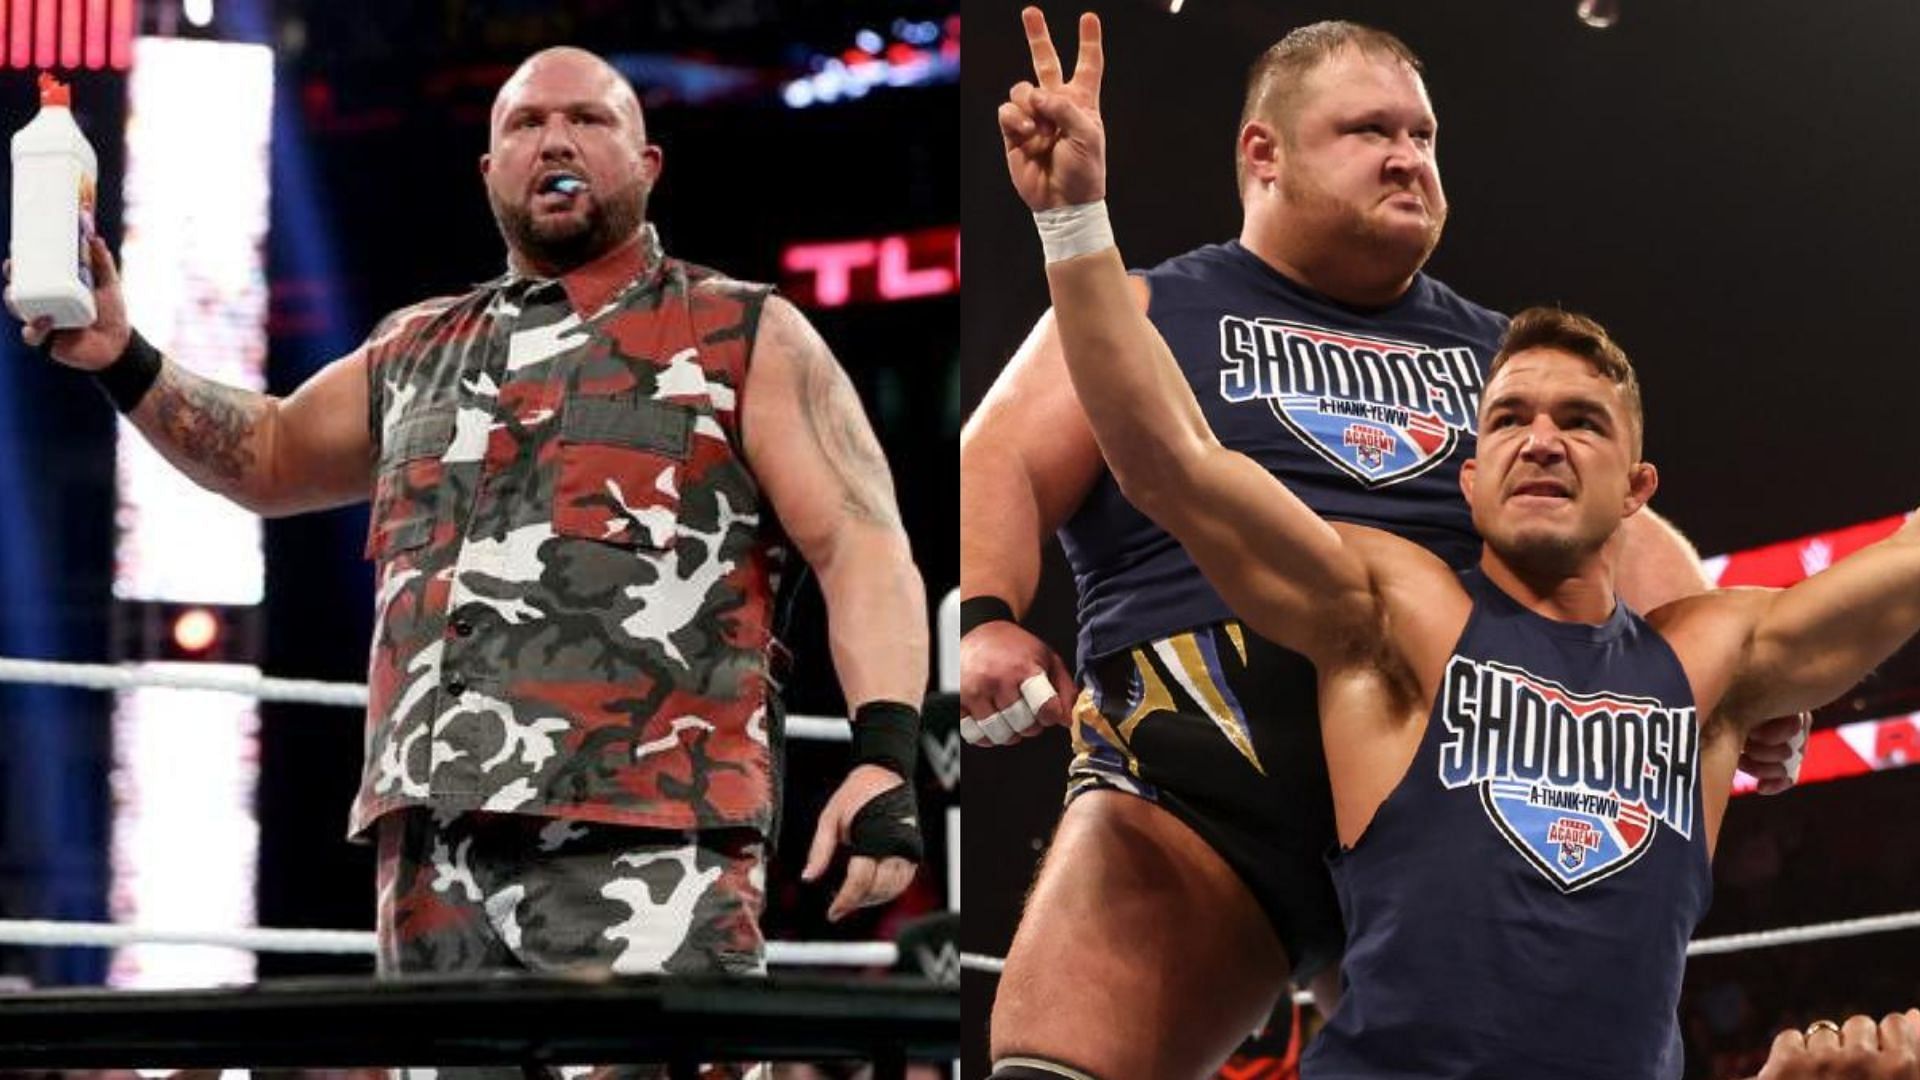 Bubba Ray Dudley (left) missed out on RAW 30